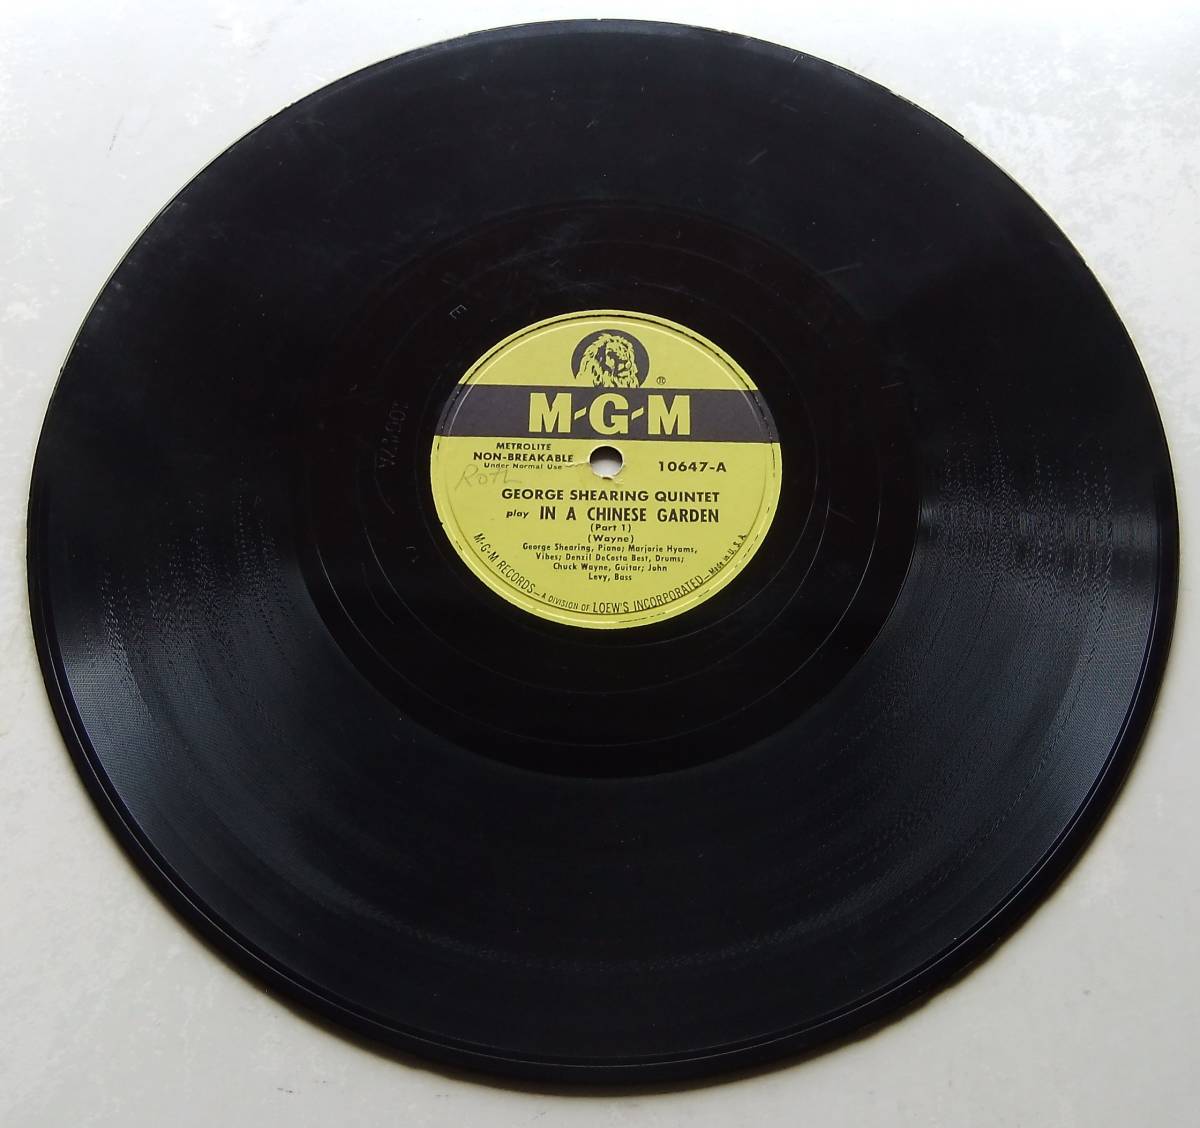 * GEORGE SHEARING Quintet / In A Chinese Garden ( Part 1 ) ( Part 2 ) * MGM 10647 (78rpm SP) *